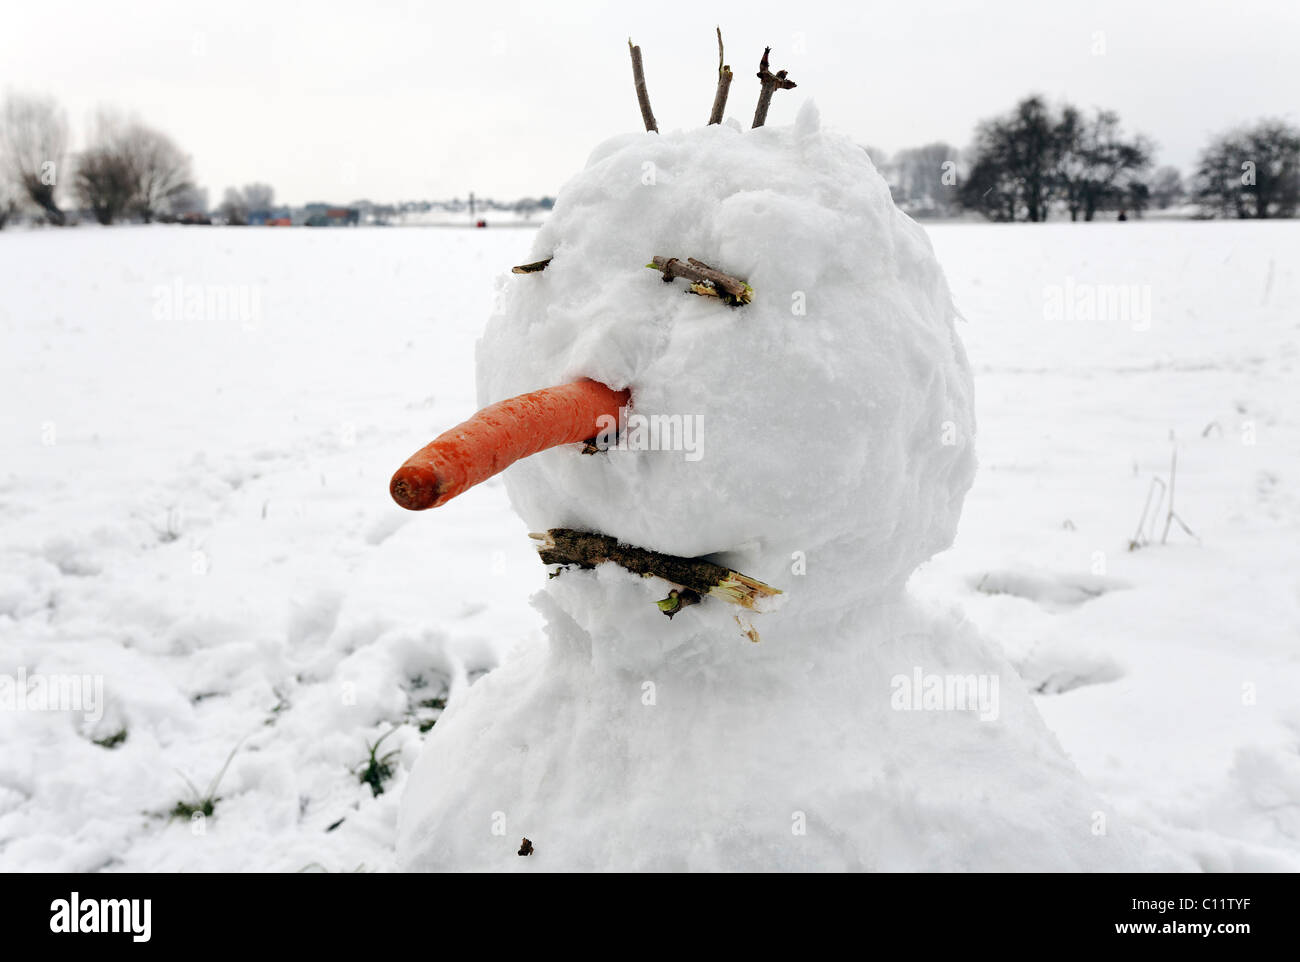 Funny snowman with carrot nose and three hairs on his head, Duesseldorf-Kaiserswerth, North Rhine-Westphalia, Germany, Europe Stock Photo